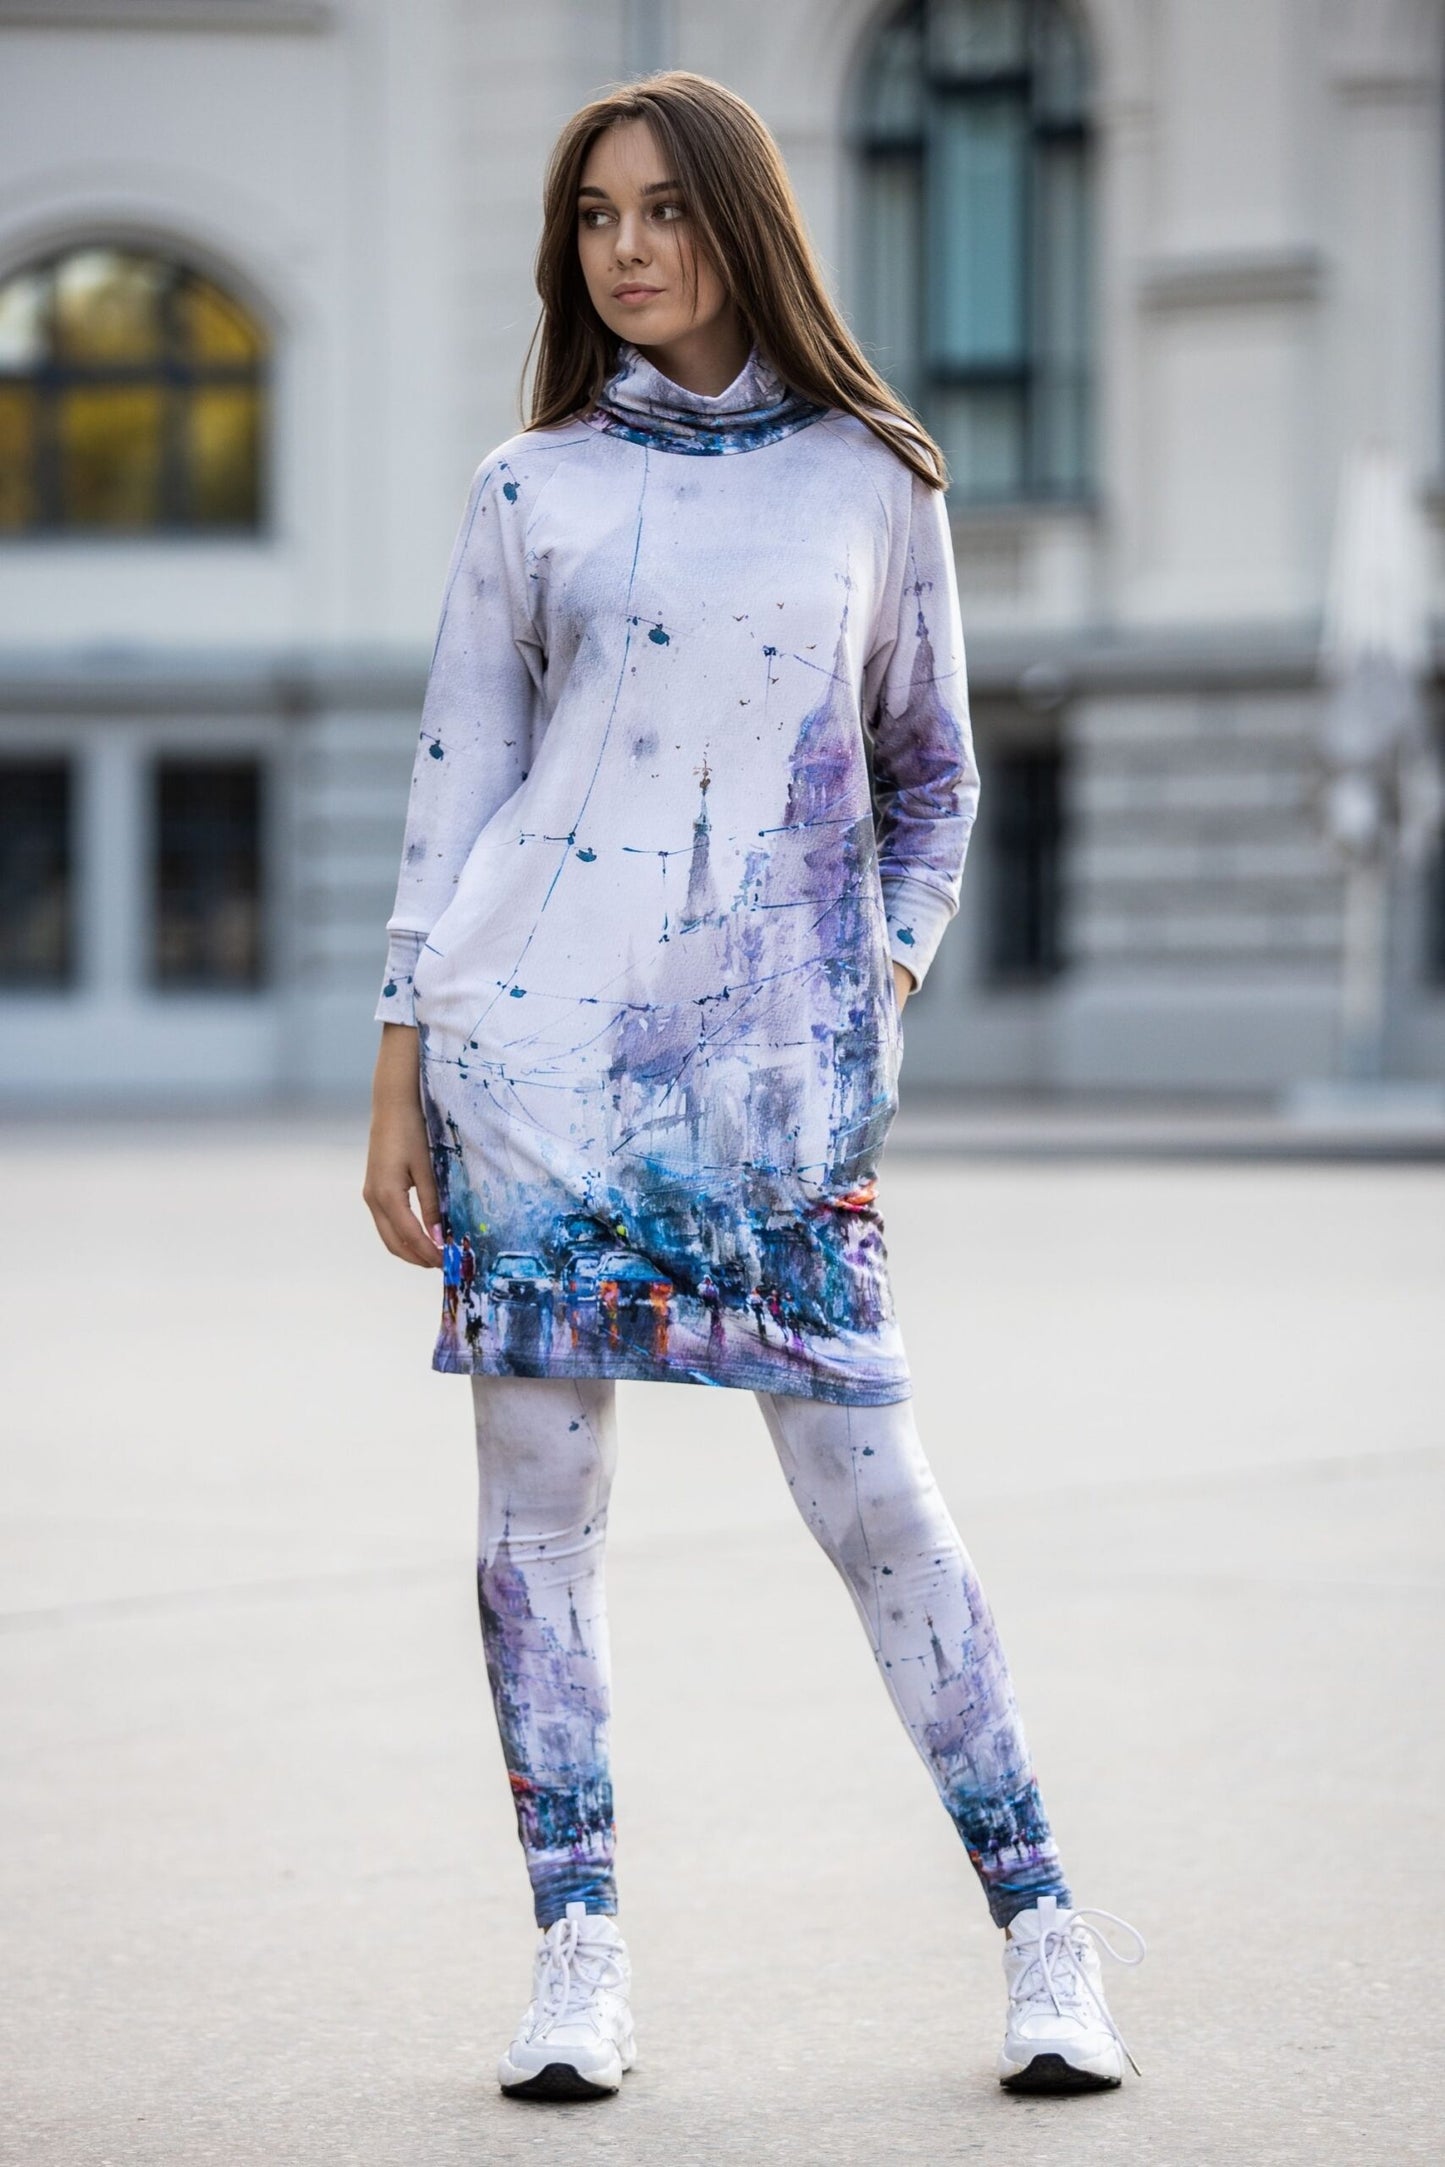 Jumperdress / tunic with Riga landscape